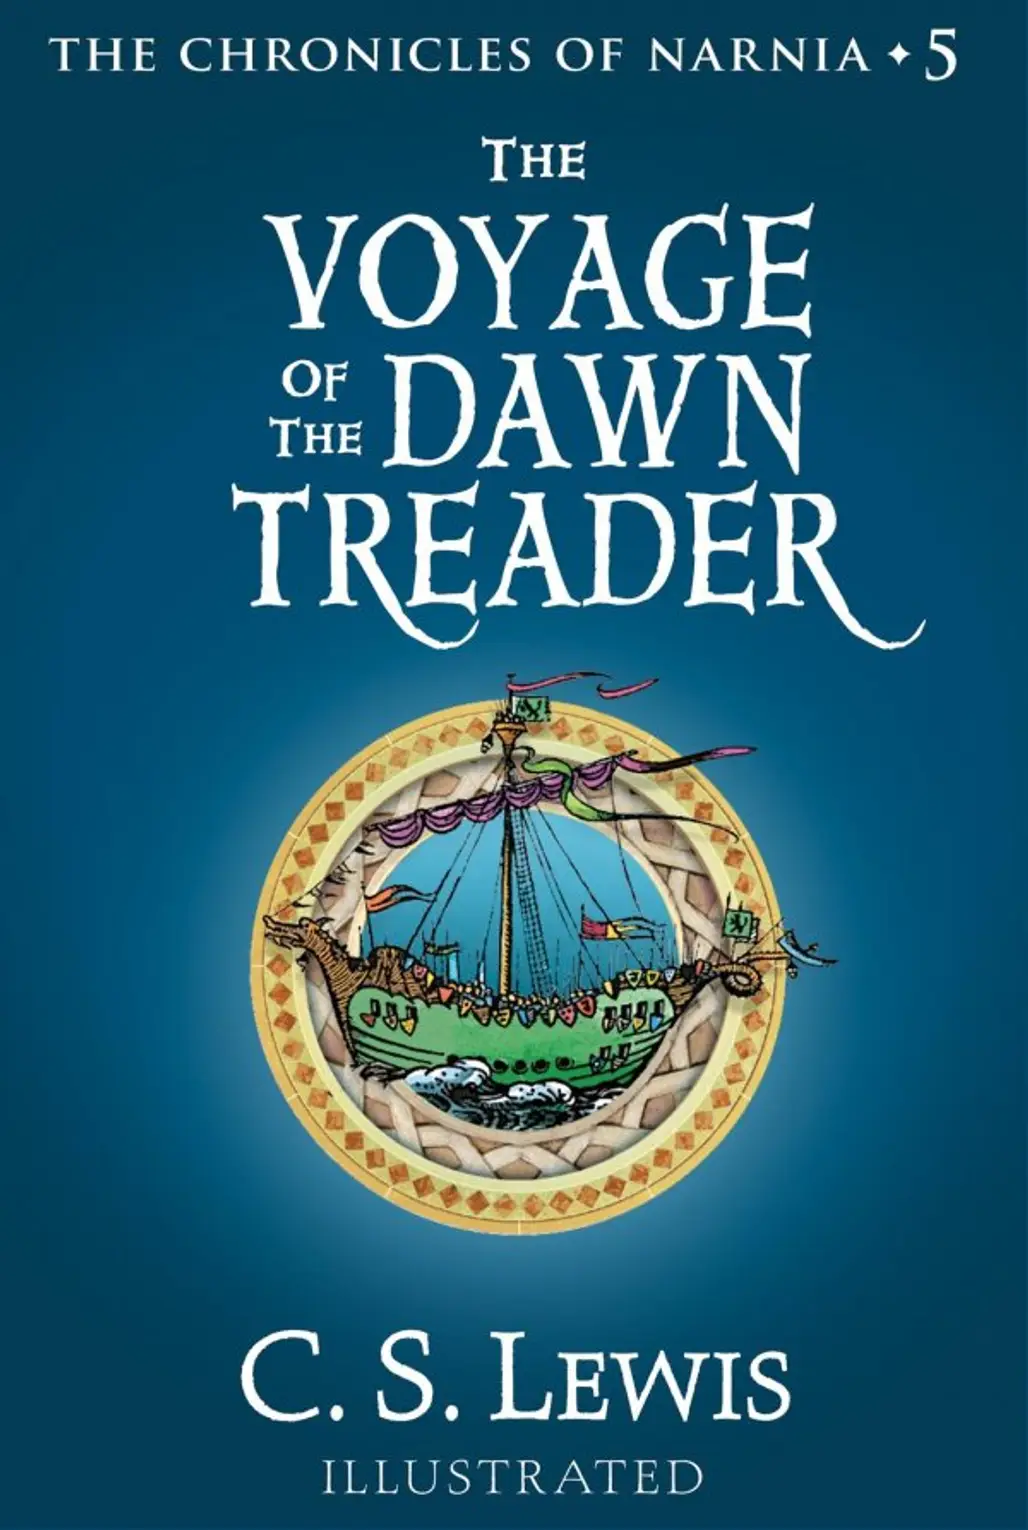 The Voyage of the Dawn Treader, C.S. Lewis